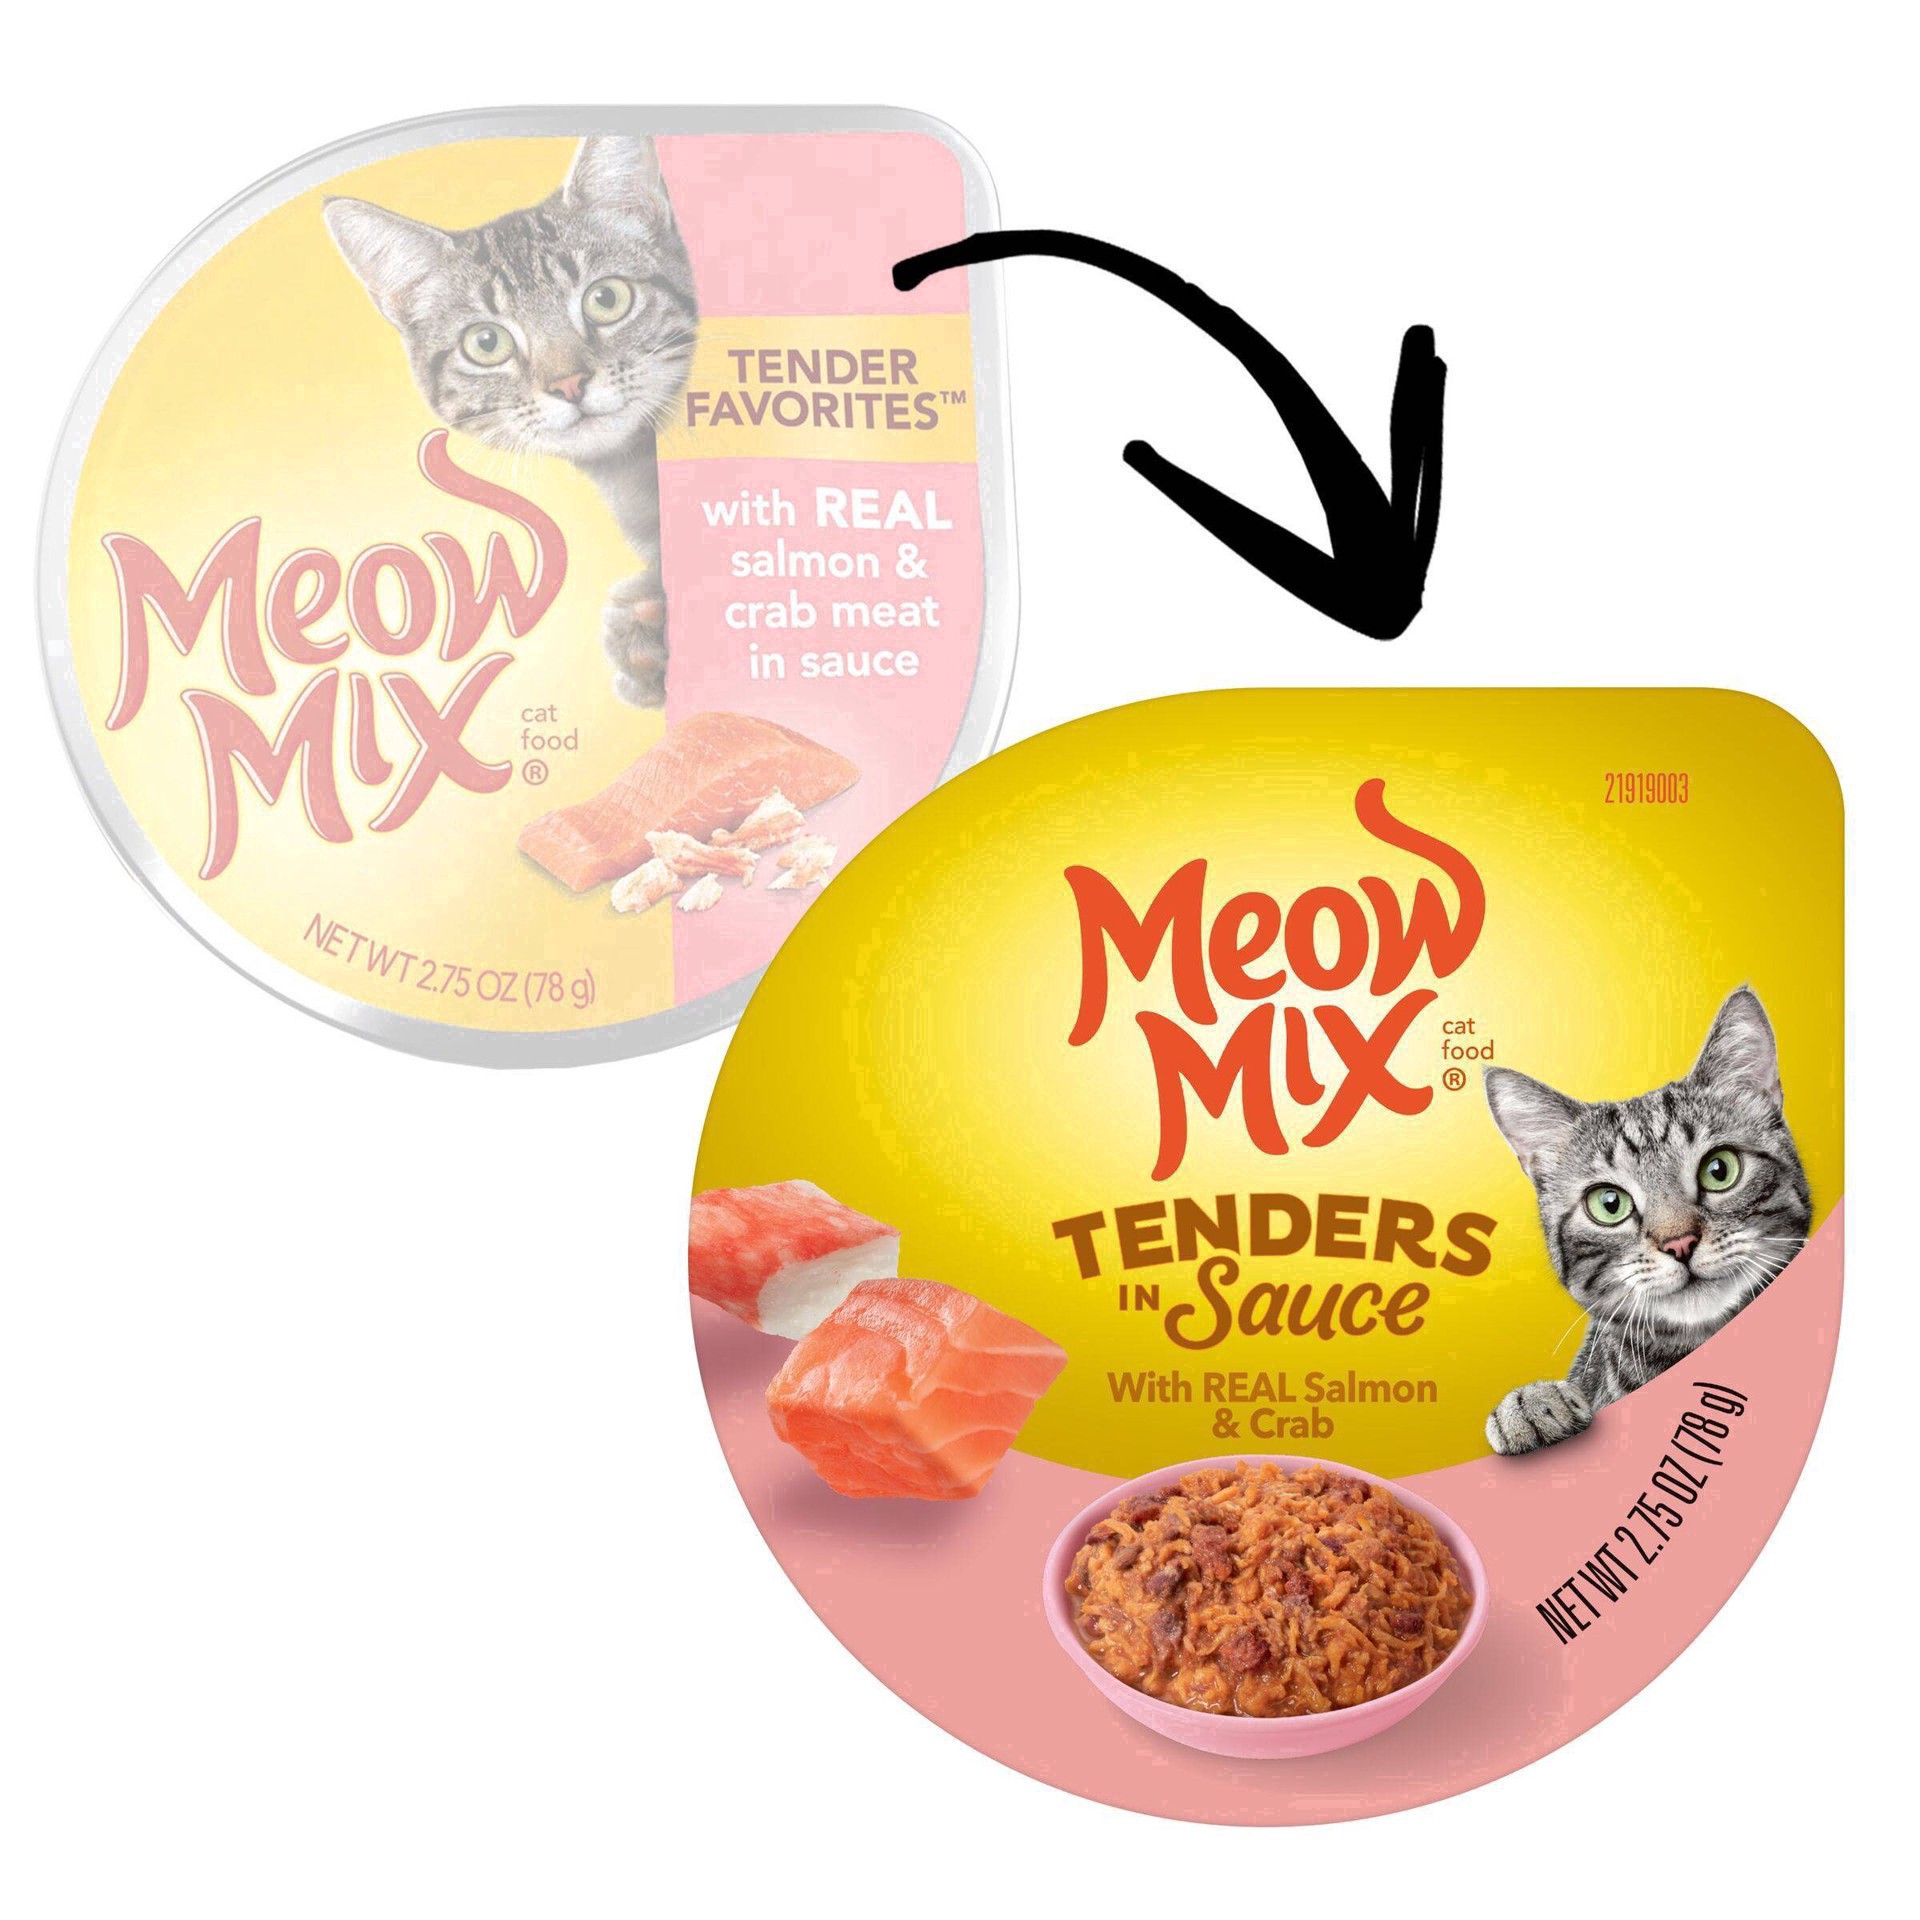 slide 37 of 64, Meow Mix Tenders in Sauce Wet Cat Food With REAL Salmon & Crab, 2.75 Oz. Cup (Packaging And Formulation Updates Underway), 2.75 oz